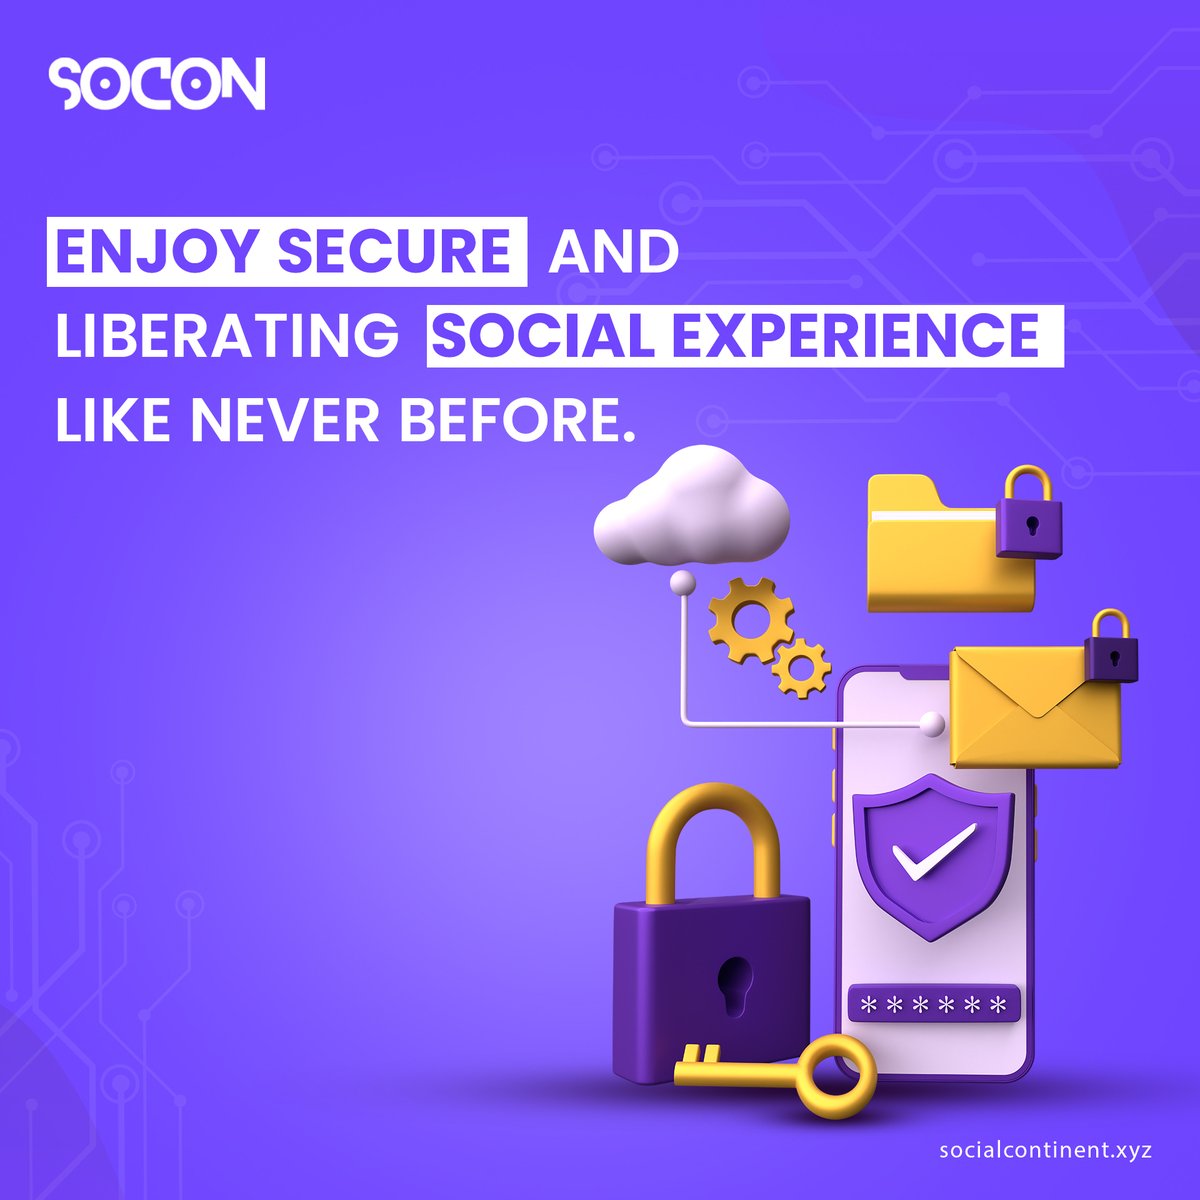 Introducing a revolutionary social experience unlike any other - one that's both secure and liberating.🚀 The decentralized SOCON app, where data takes precedence and you get a place for freely expressing yourself without reservation. 🙌

#SOCON #dapps #Web3